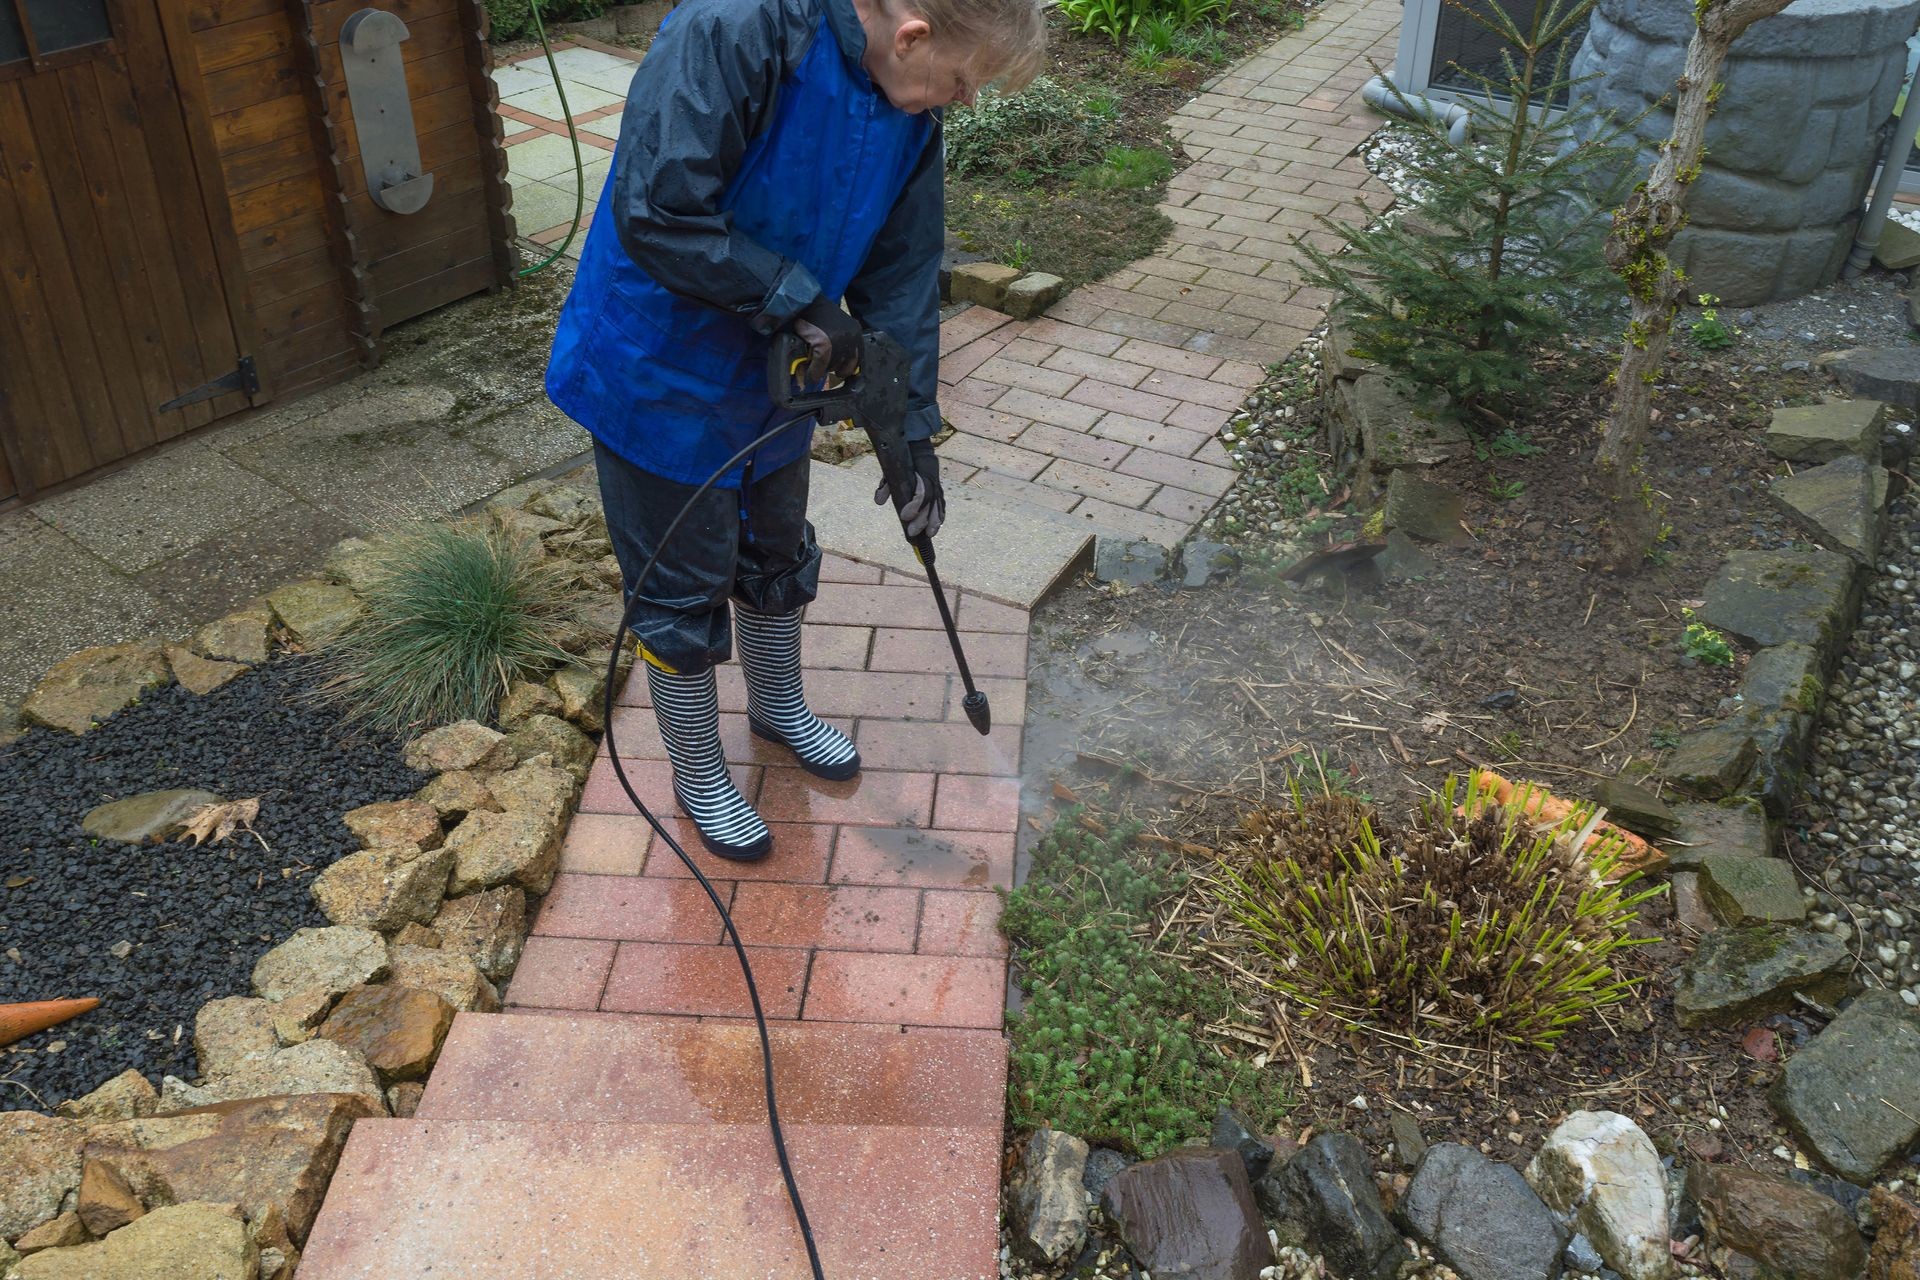 Woman cleans stone slabs with a pressure washer